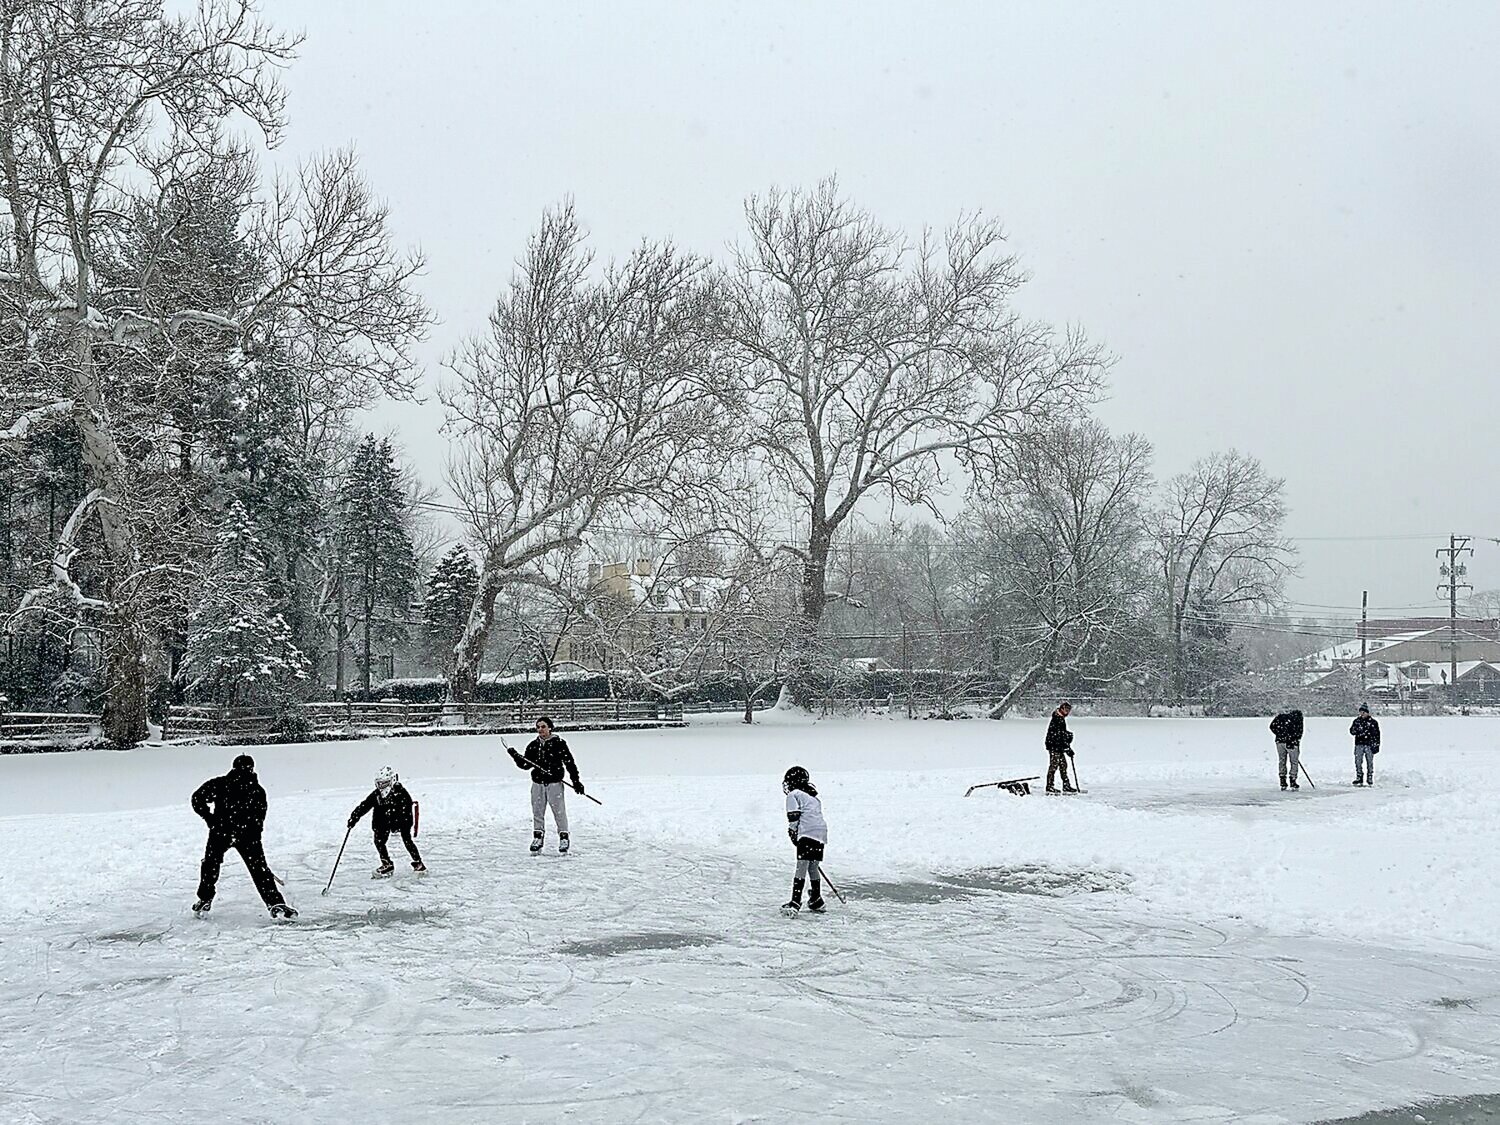 Frozen-over Lake Afton, in Yardley, became a makeshift ice hockey rink Jan. 19 as local children laced up their skates and enjoyed an unexpected day off from school.